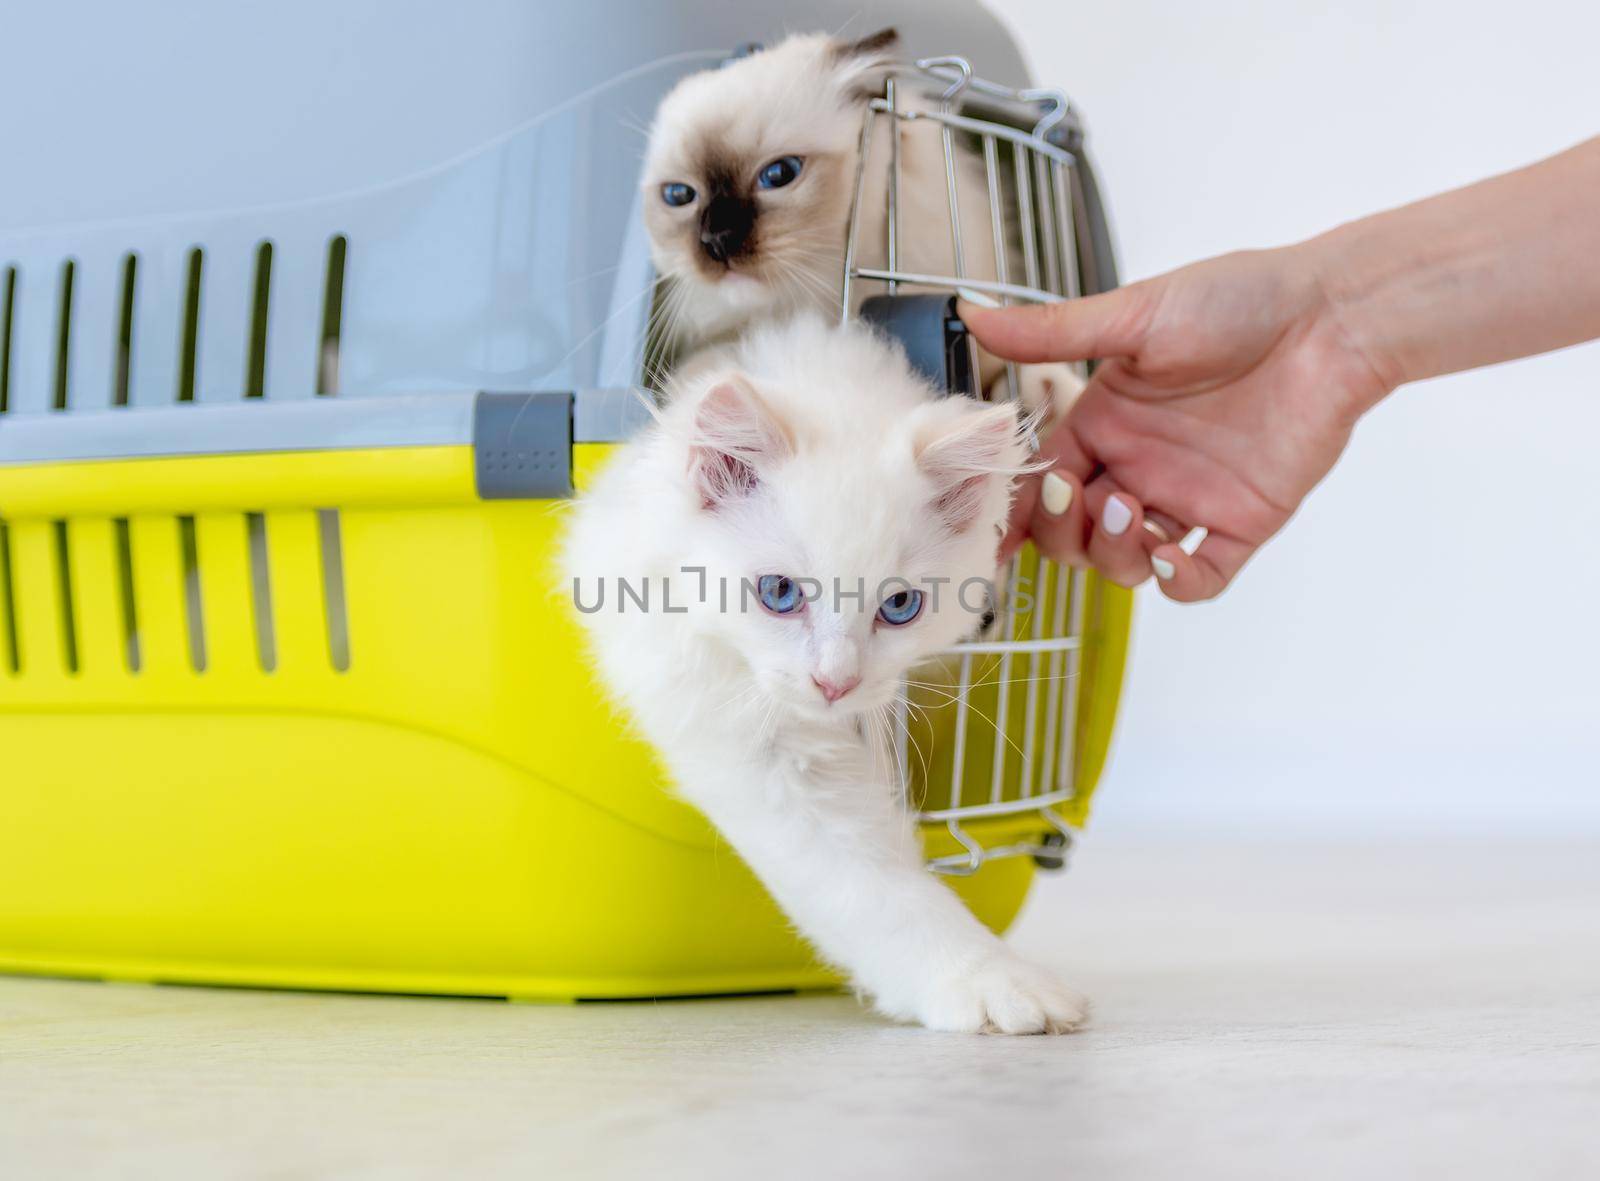 Two adorable ragdoll cats closed in pet carrying for transportation trying go out outside. Purebred fluffy domestic feline animals inside basket with metal lattice and hand of owner